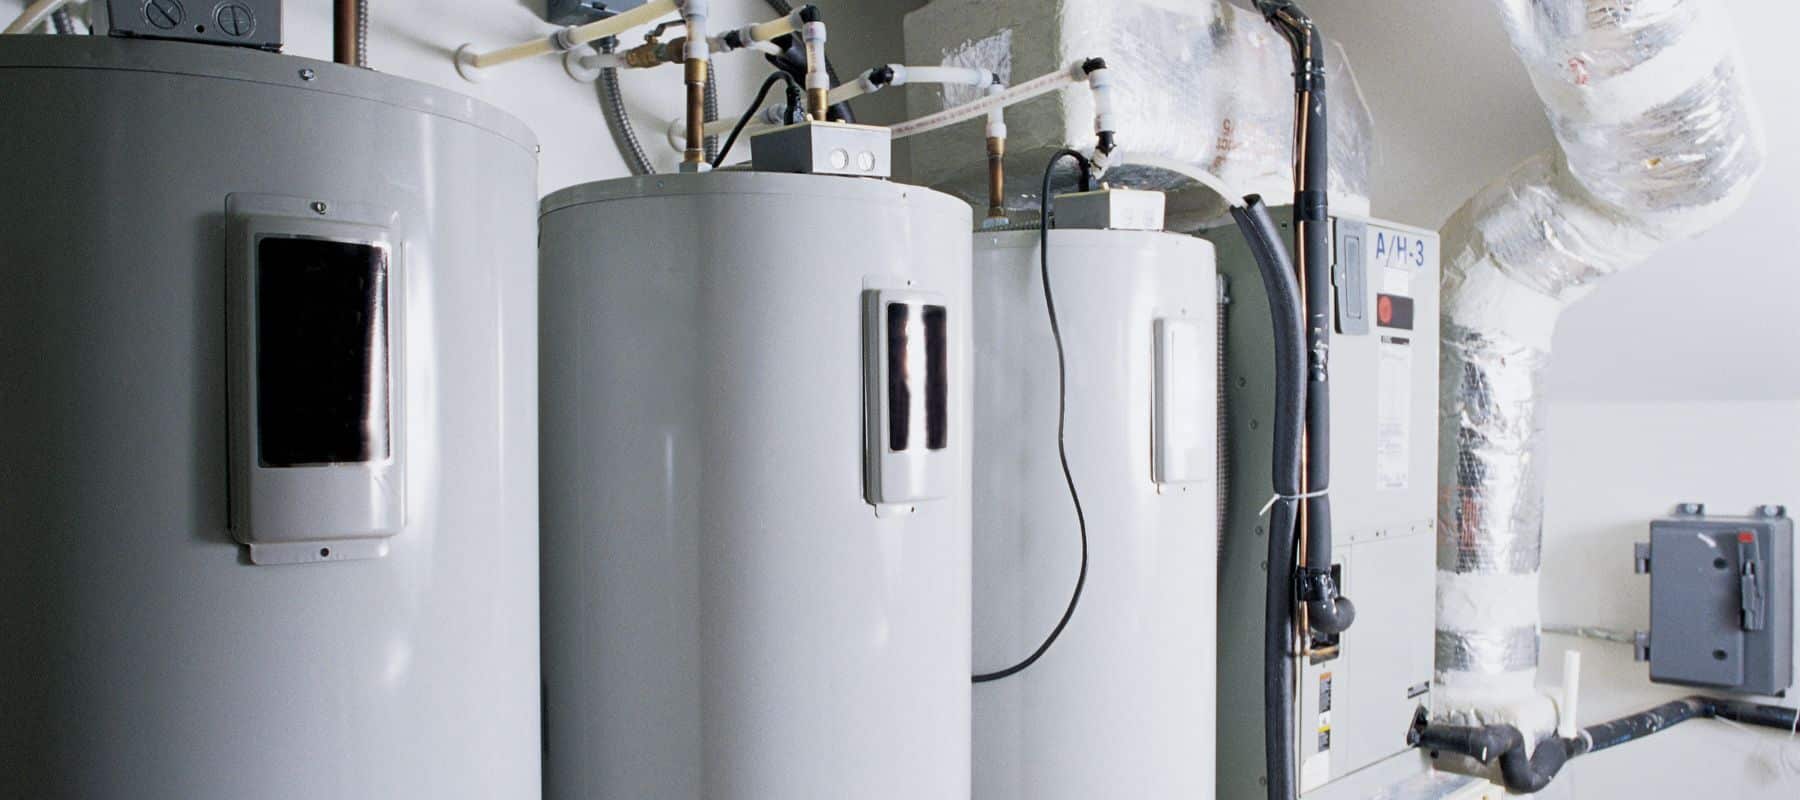 tanked water heaters lined up on a wall in a commercial san antonio building